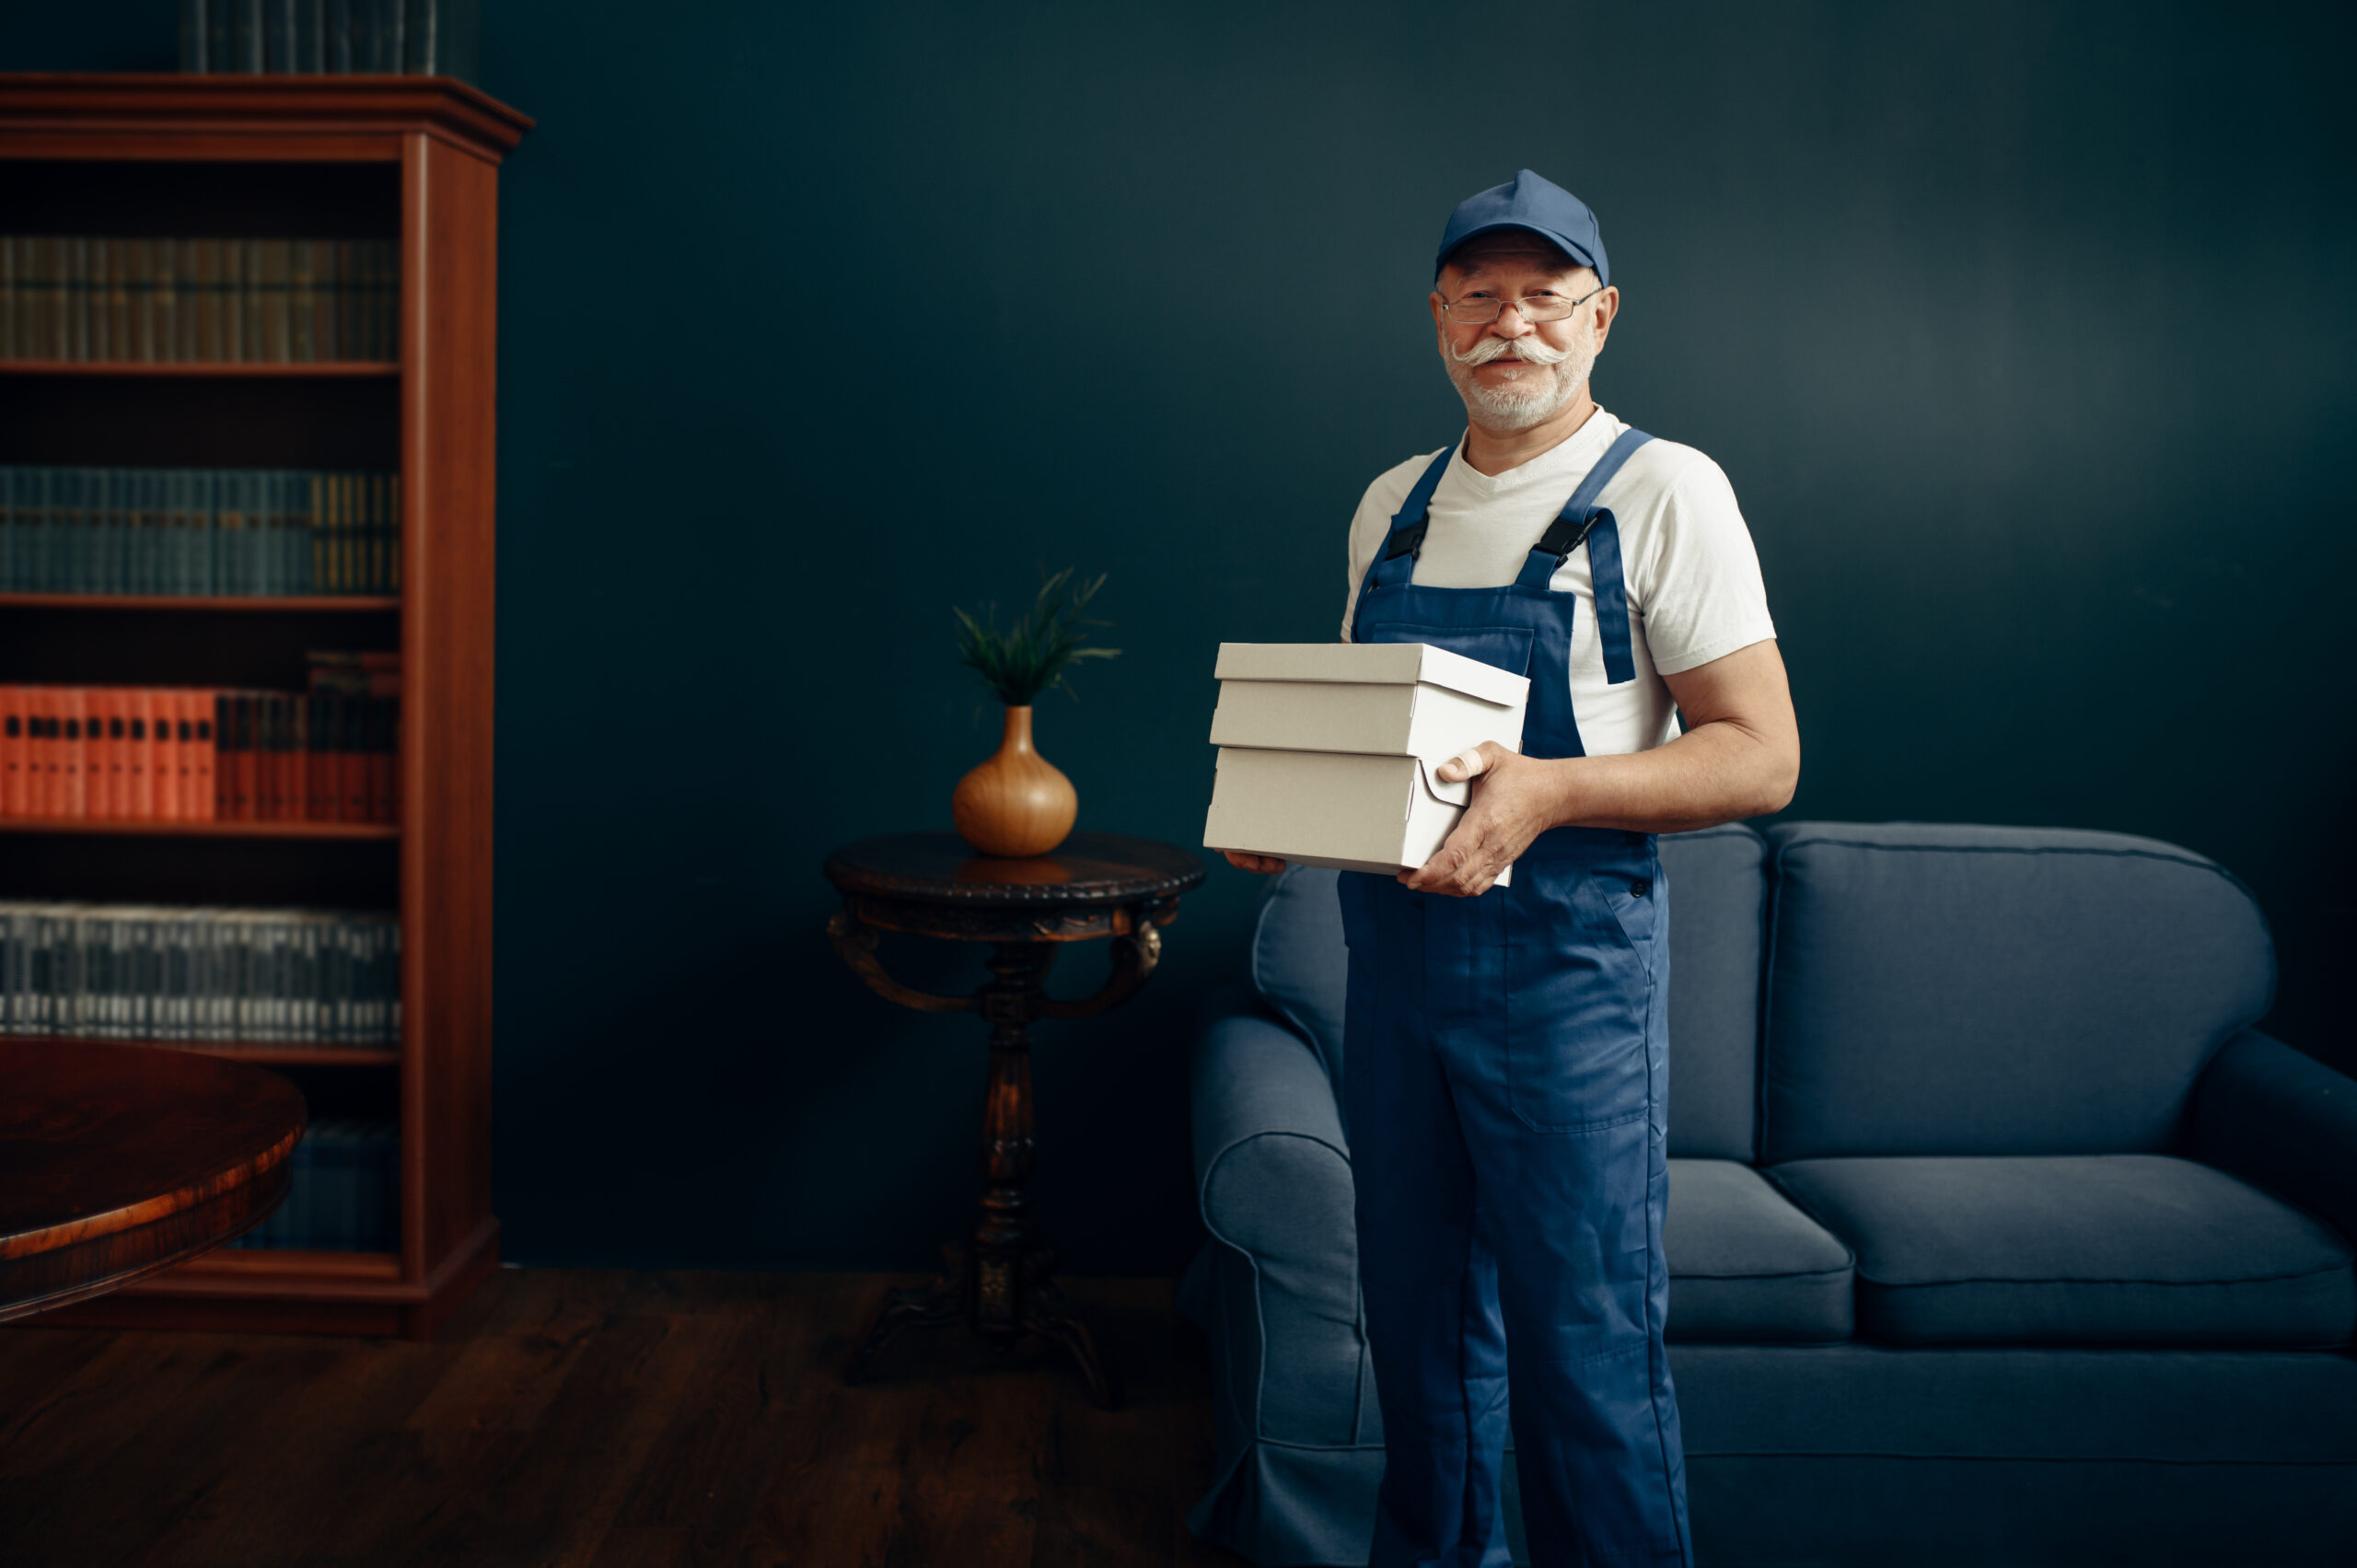 An expert in overalls holding a box in front of a couch.